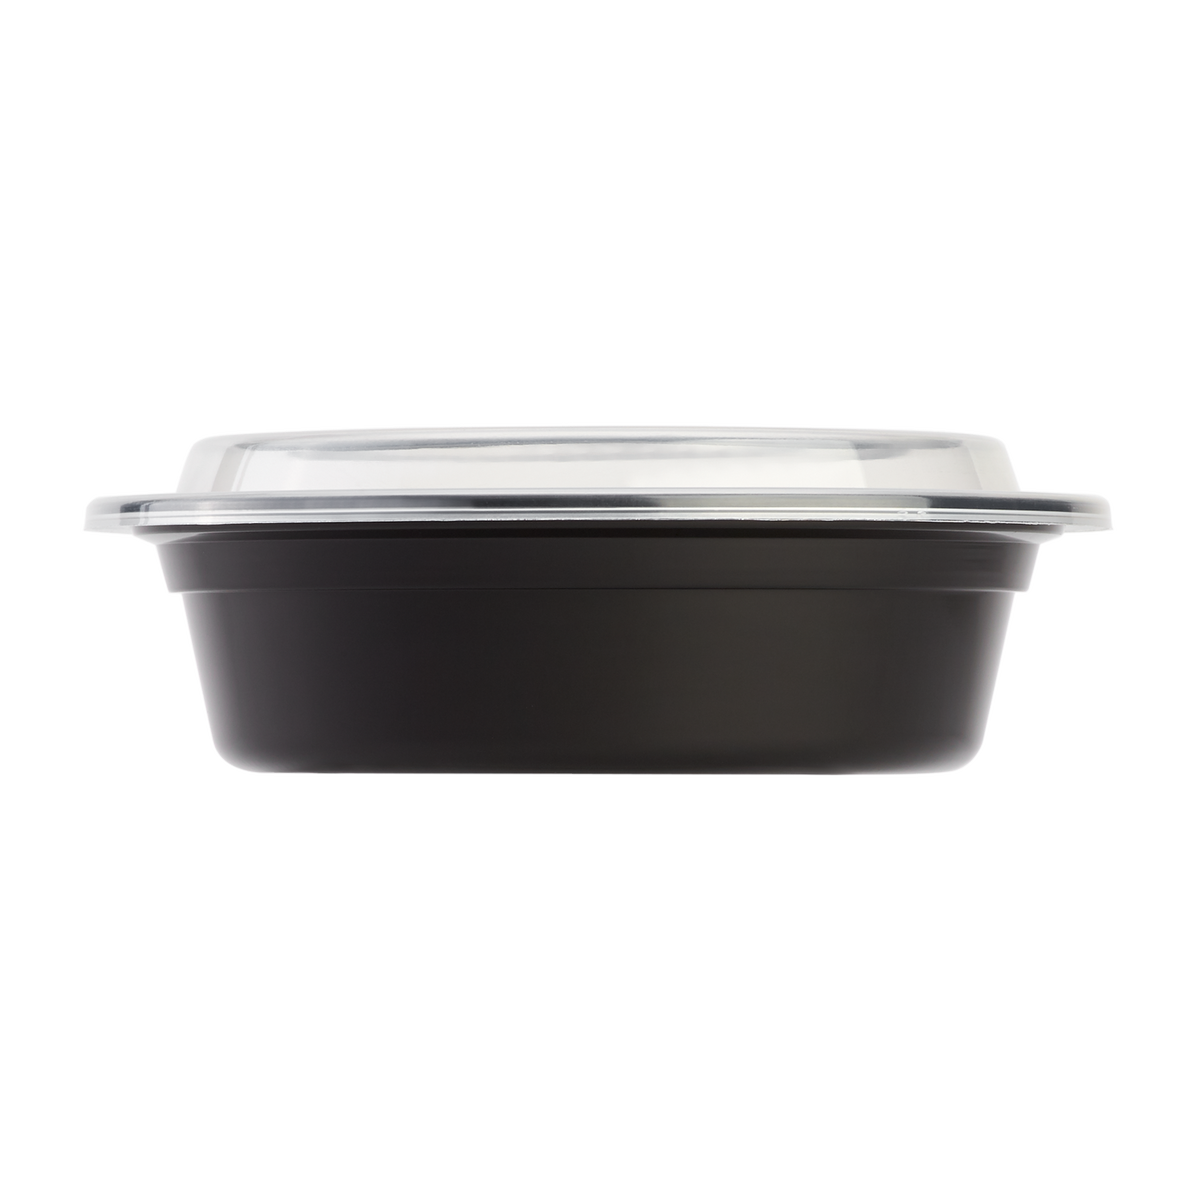 Otor 16oz Meal Prep Box - China Food Container and Bento Box price